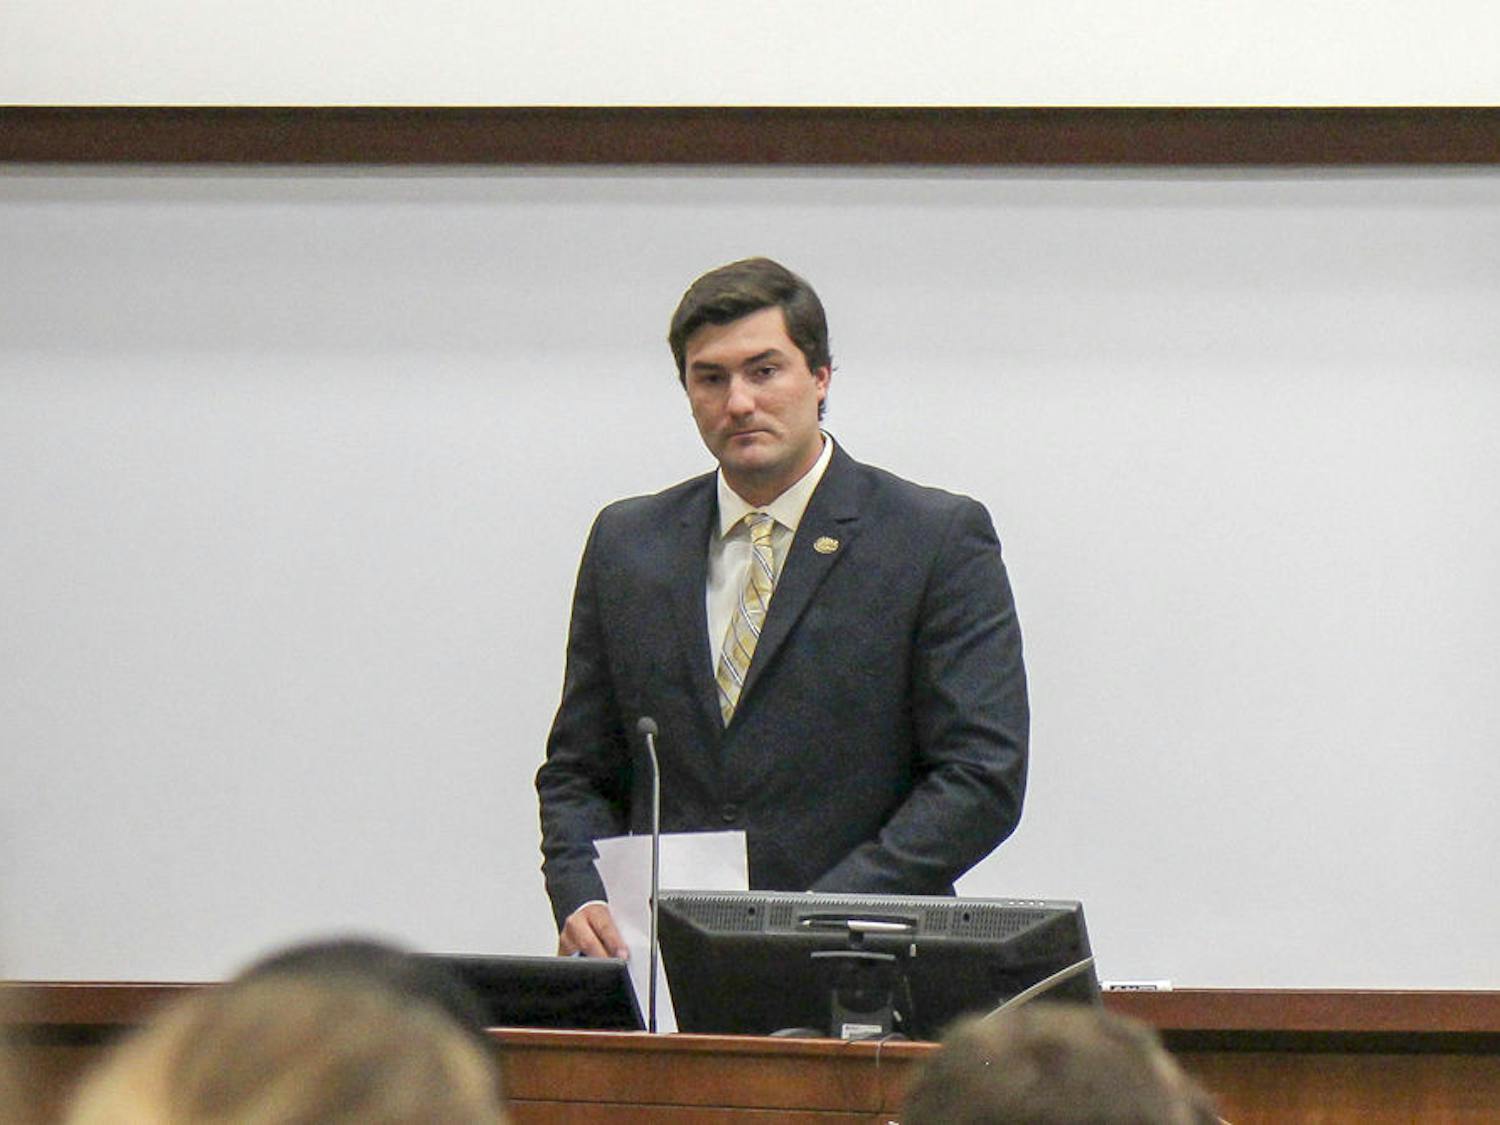 Sen. Davis Bean, chairman of the budget and appropriations committee, discusses the budget during Tuesday’s Student Senate meeting.